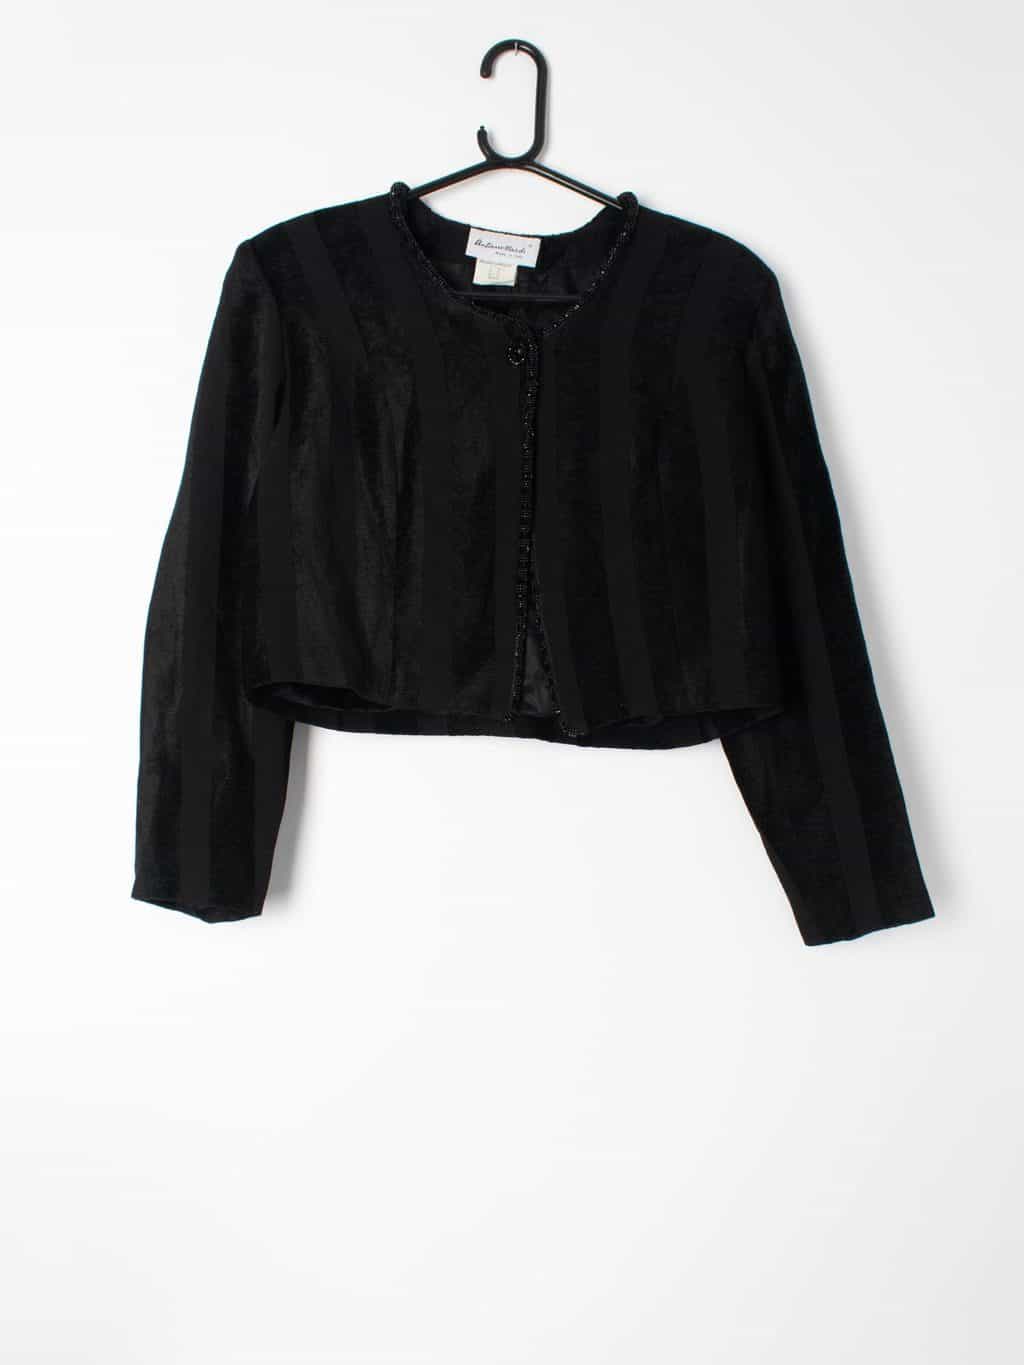 Womens vintage cropped jacket with massive shoulder pads, monochrome ...